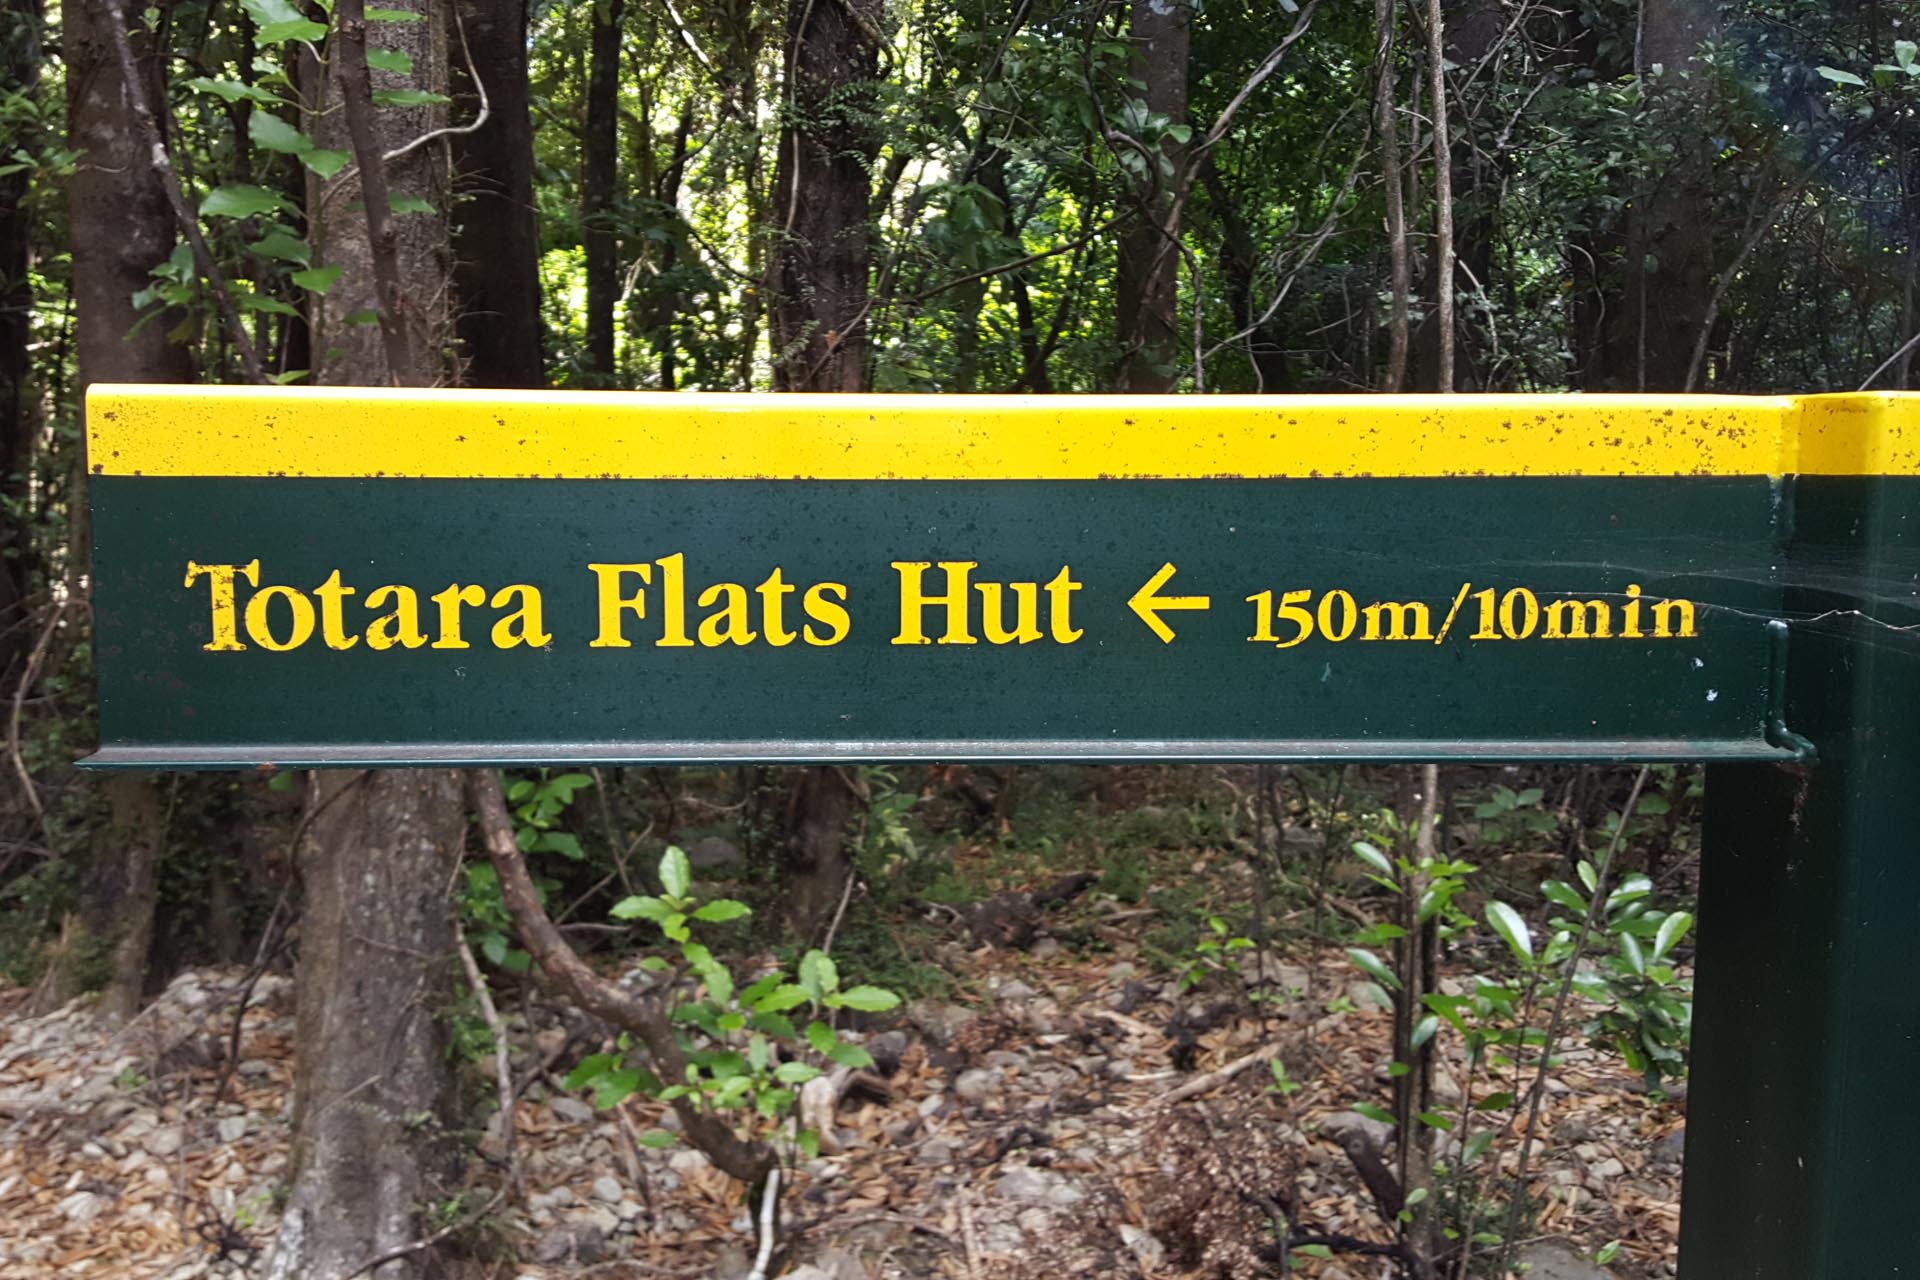 Totara Flats Hut sign with incorrect time to hut?